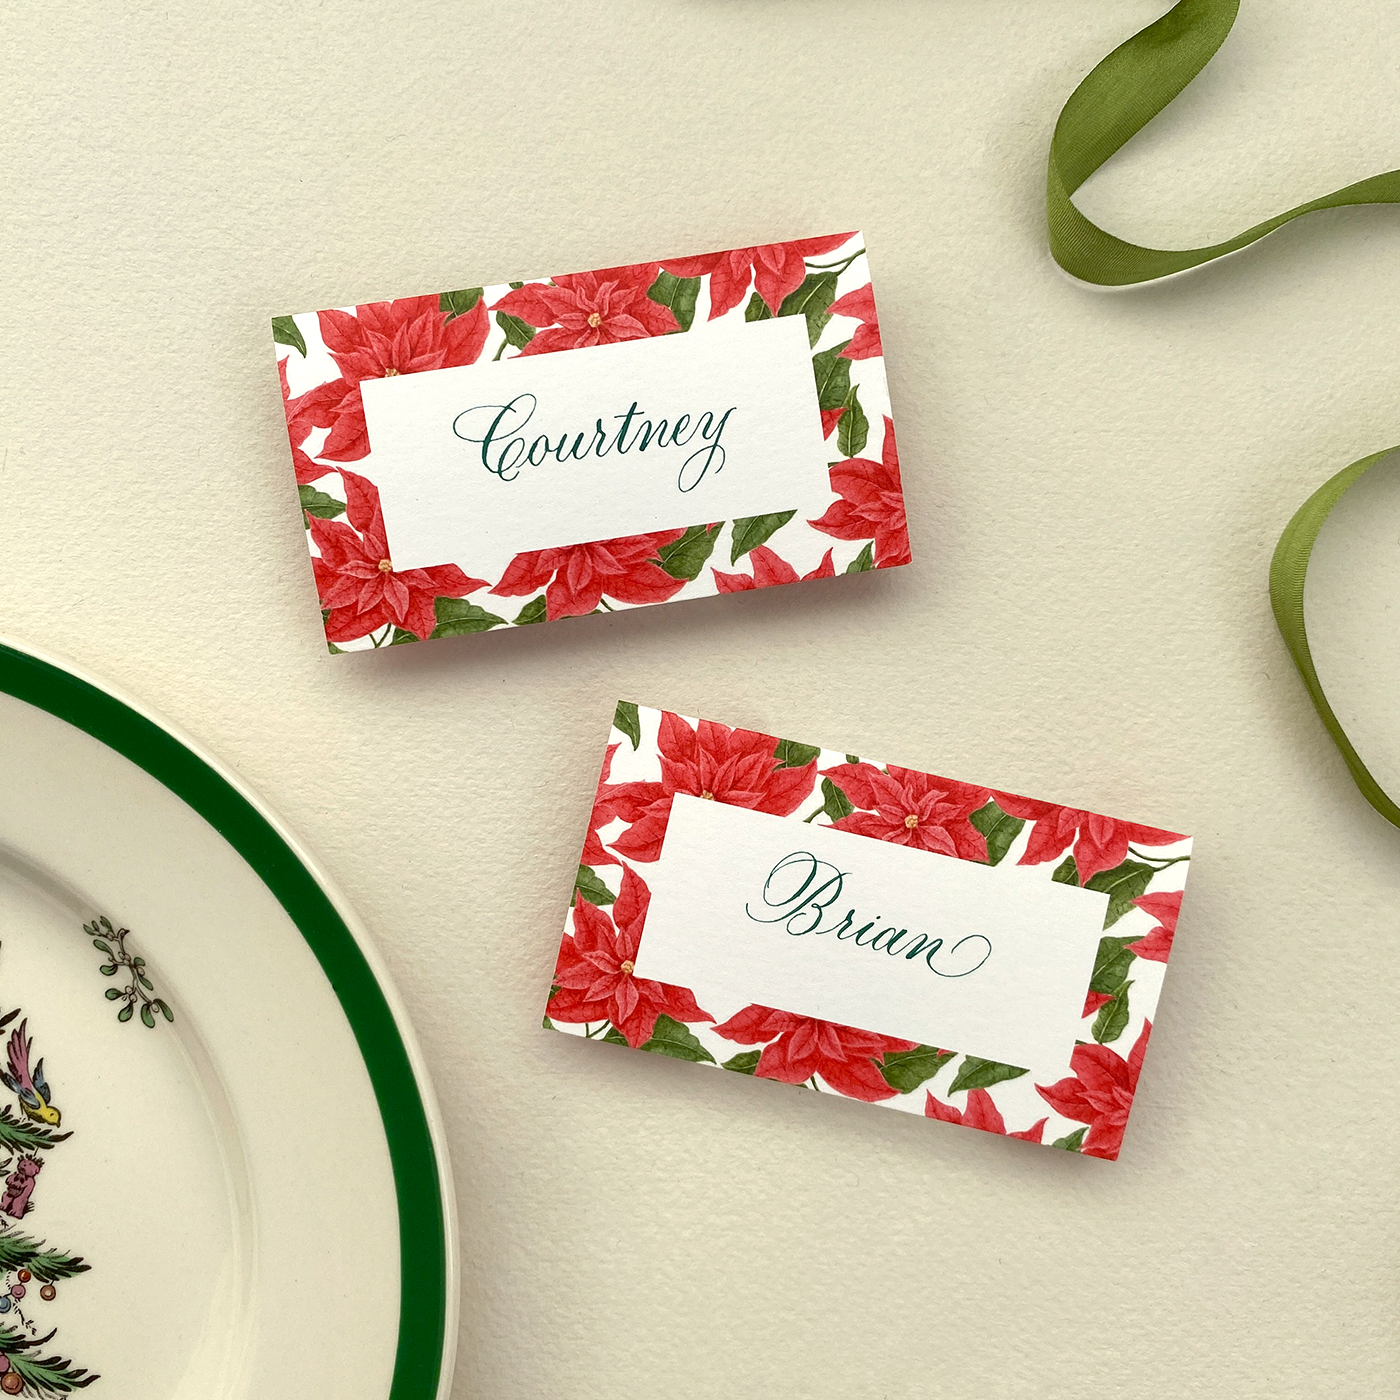 Poinsettia Border Place Cards with Calligraphy